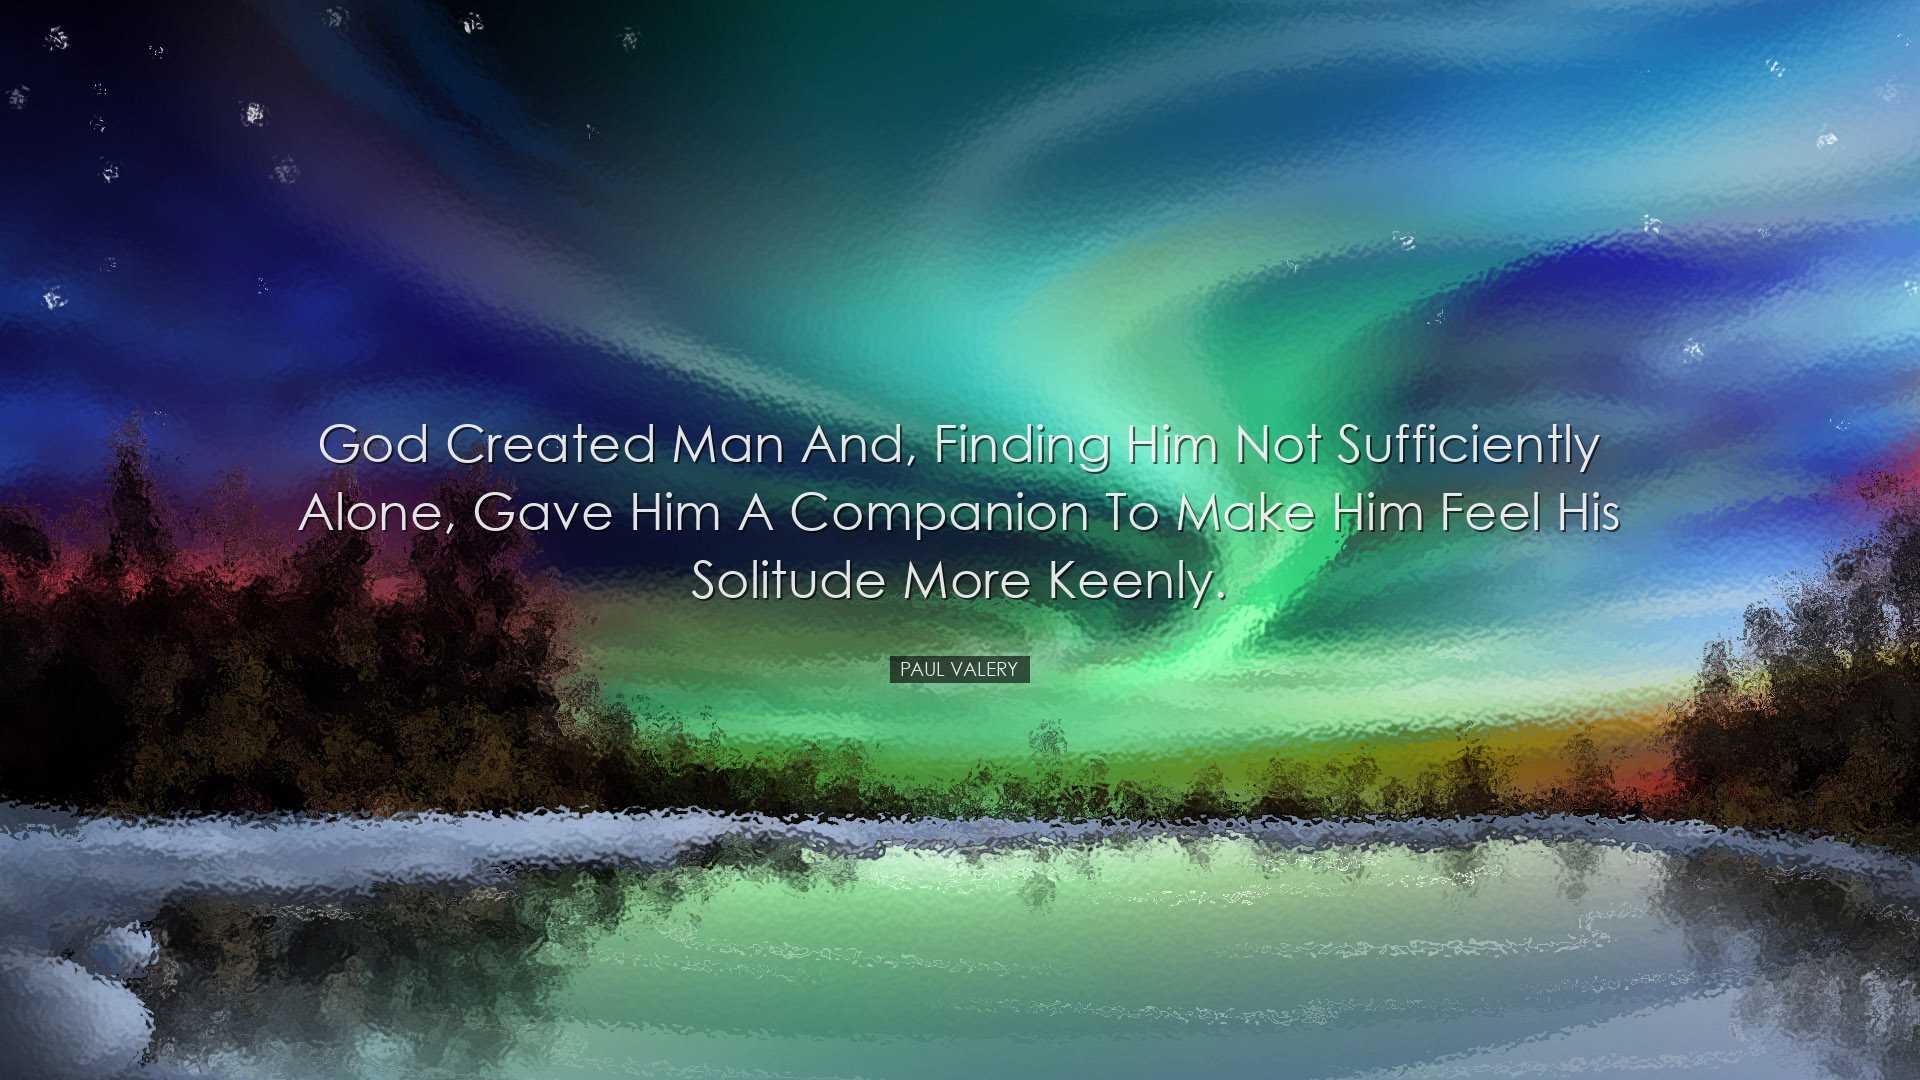 God created man and, finding him not sufficiently alone, gave him